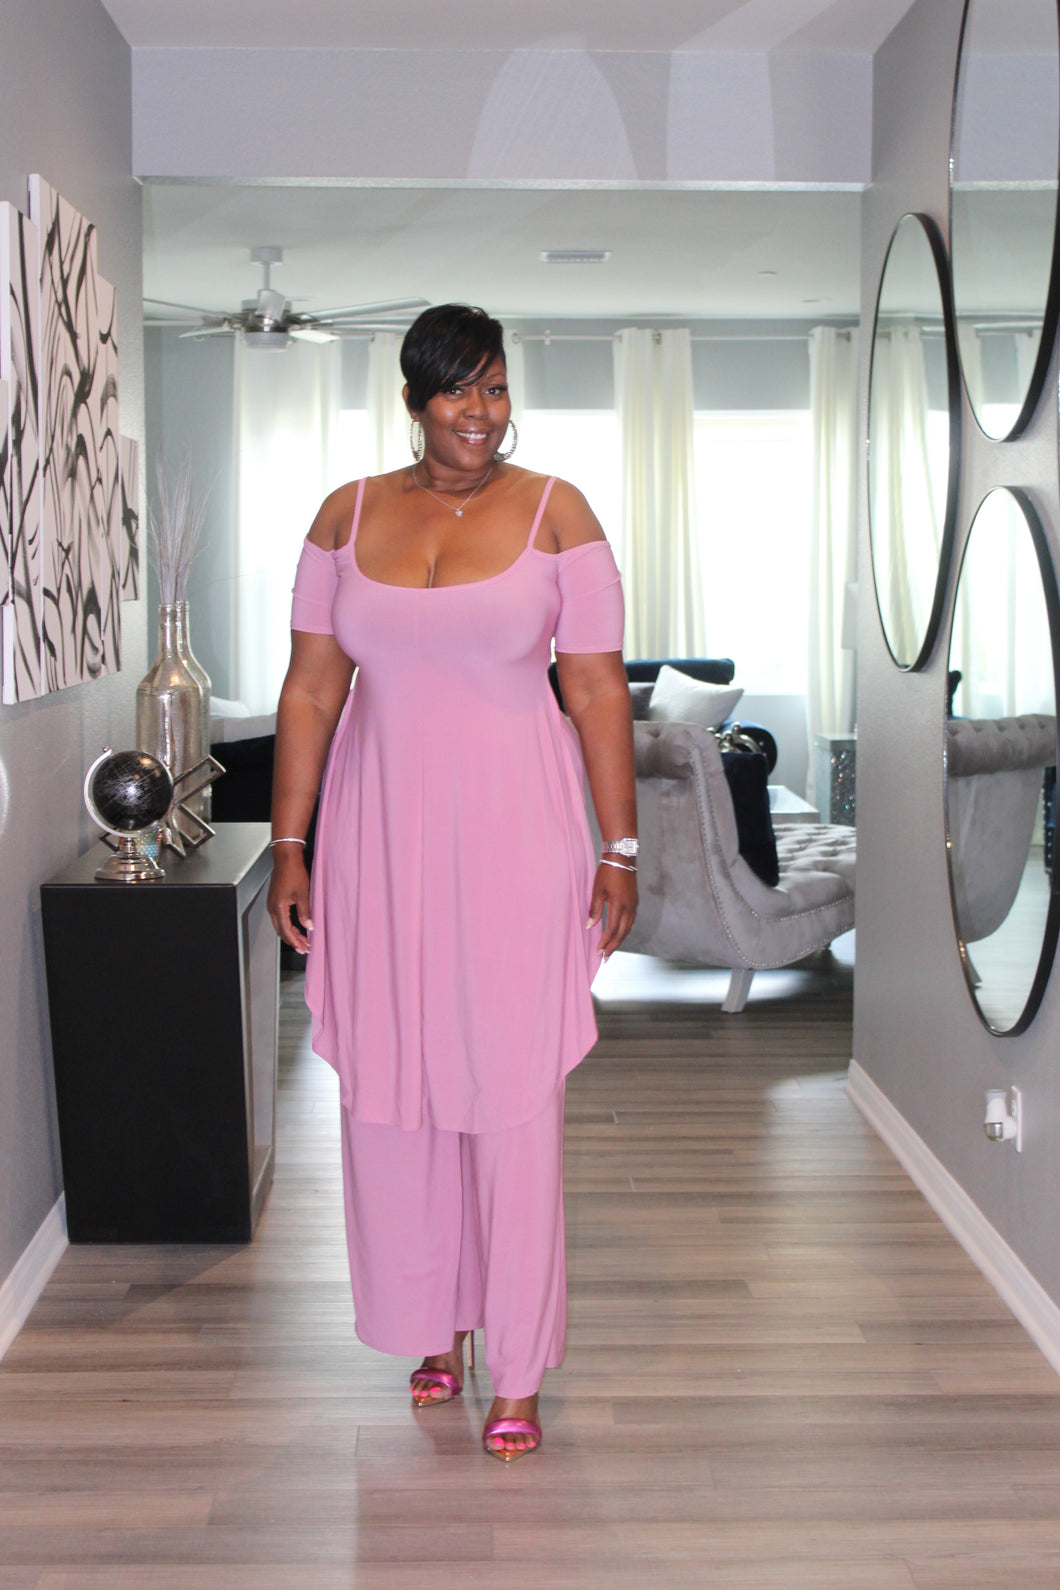 Sale Item!!! Pretty In Pink Off Shoulder Top & Palazzo Pants Set